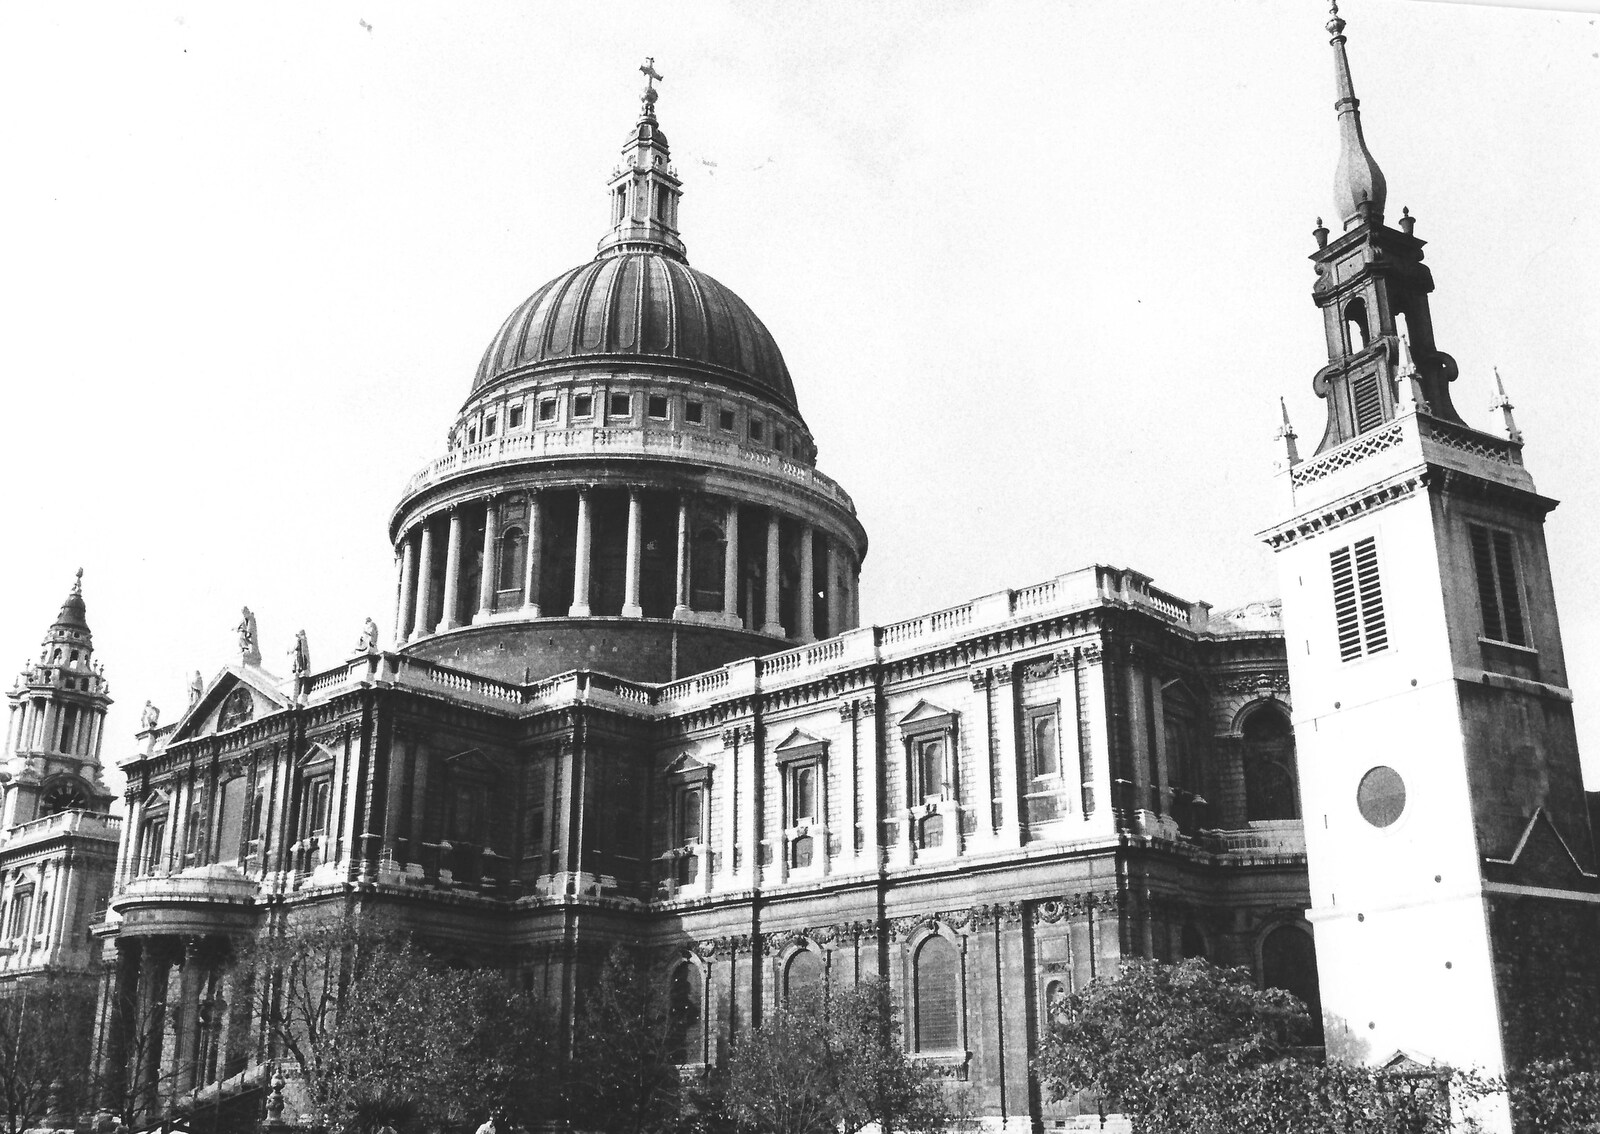 St Paul's cathedral from Uni: The Second Year in Black and White, Plymouth Polytehnic, Devon - 8th March 1987